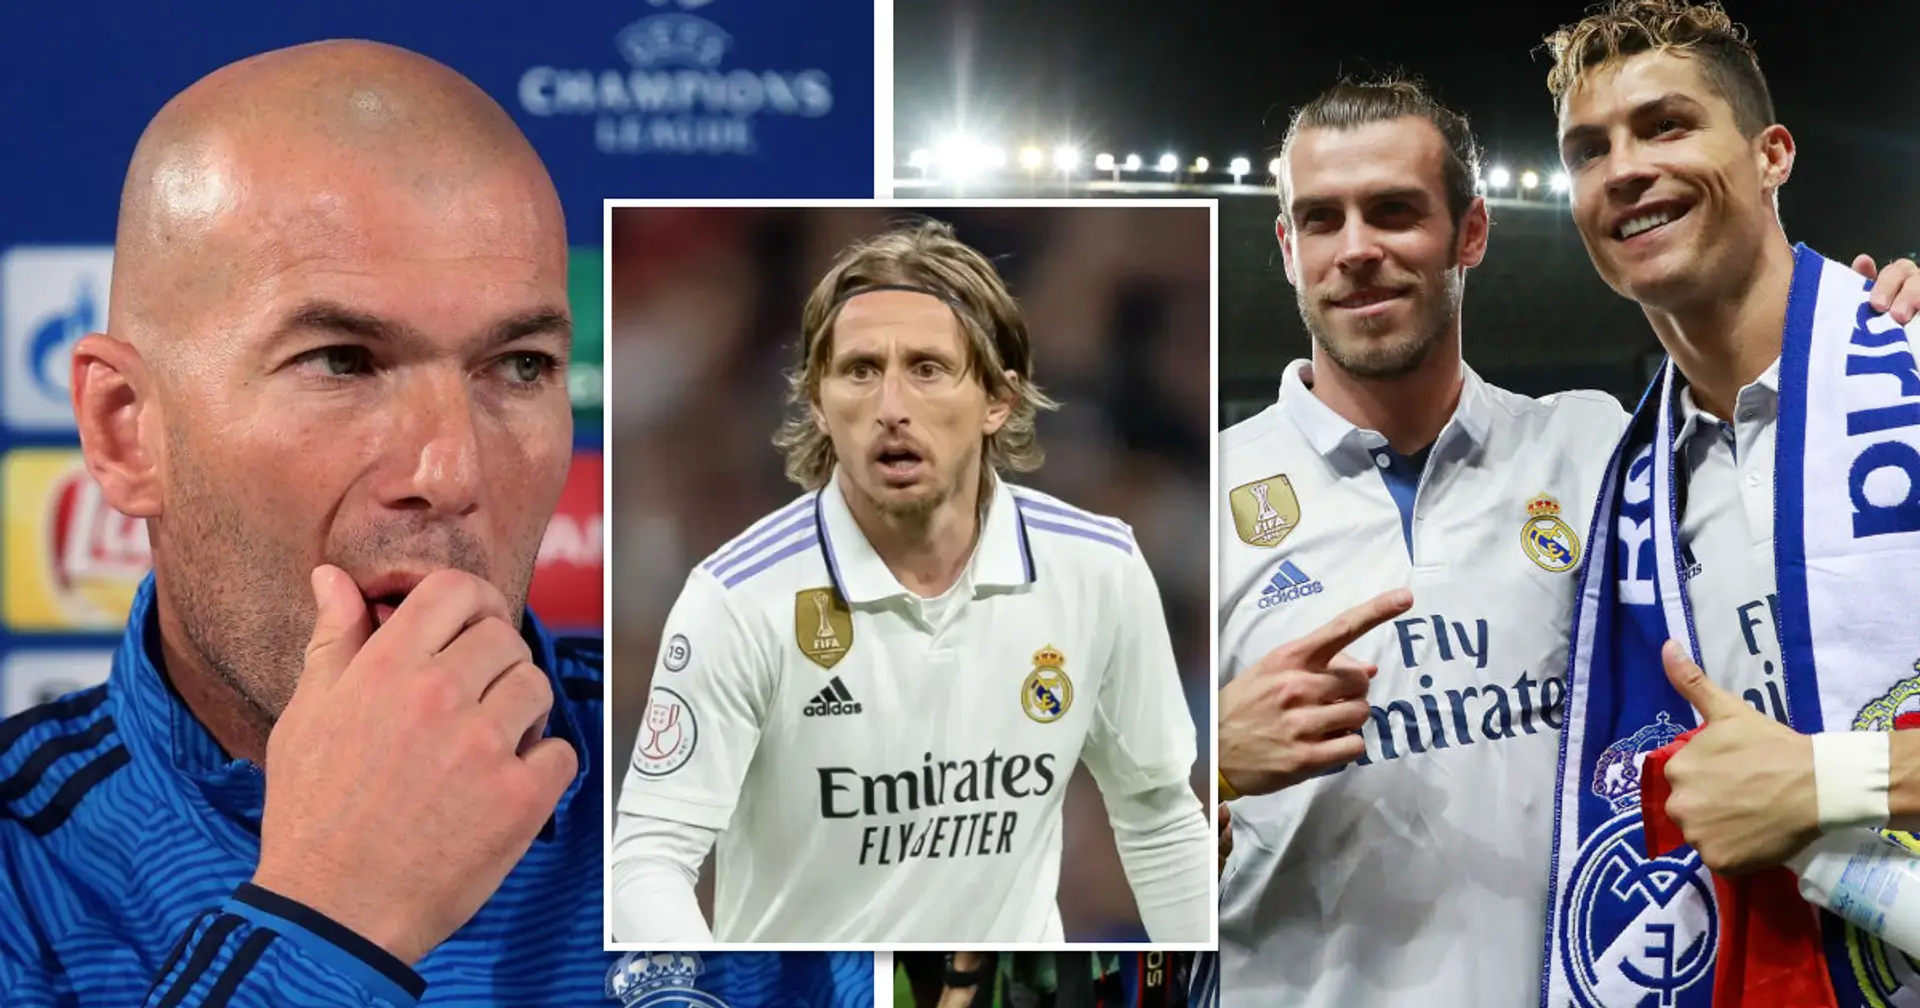 Zidane names 4 Real Madrid players he's proud to have coached - didn't mention Modric